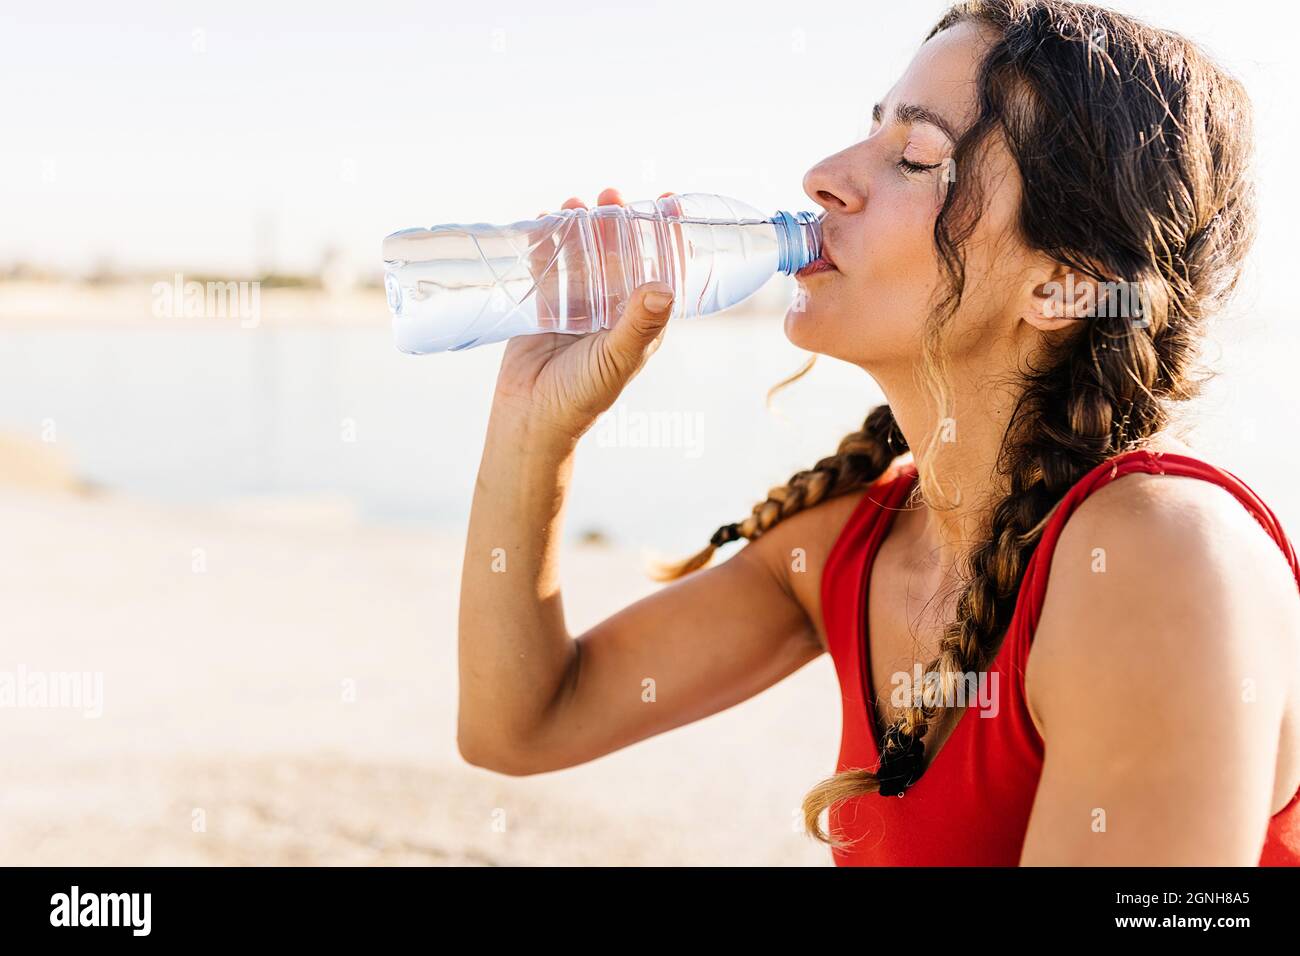 Fitness woman drinking water from bottle after workout session in the morning Stock Photo